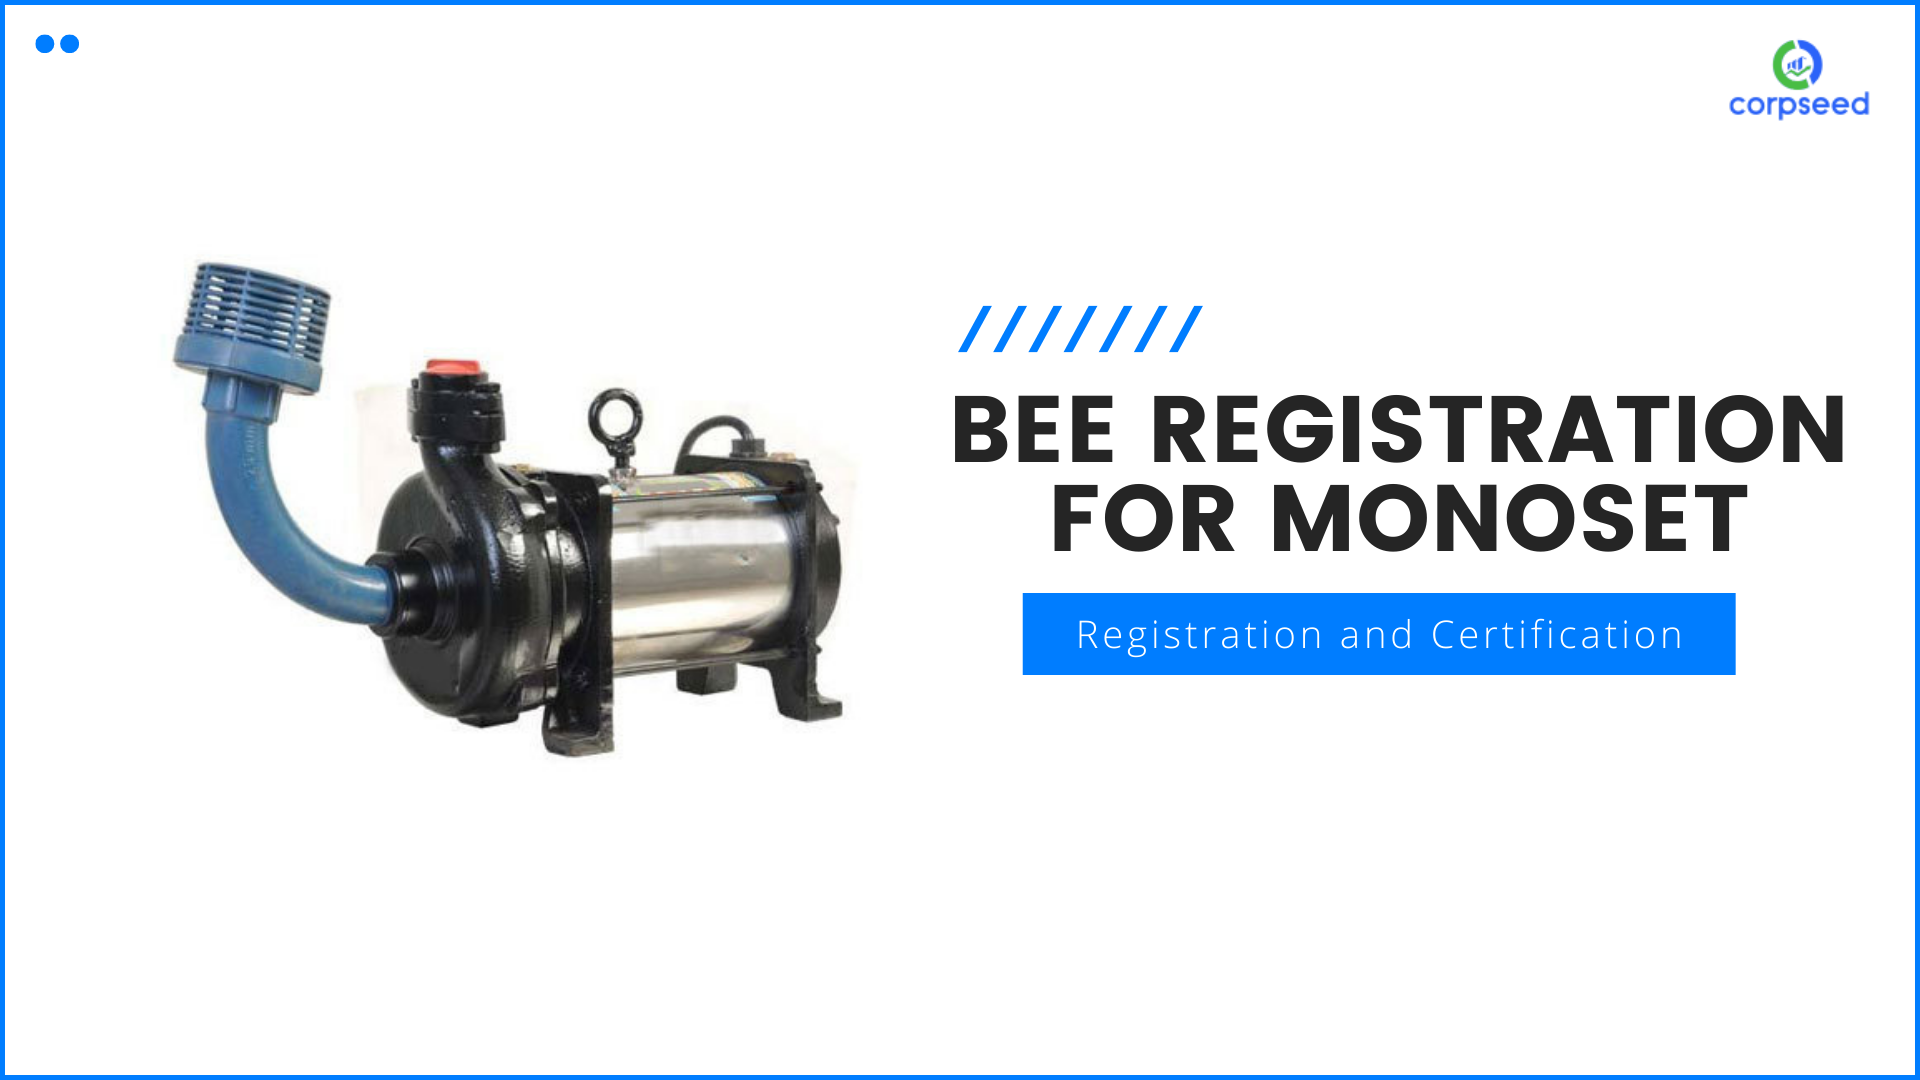 BEE_Registration_for_Monoset_Corpseed.png